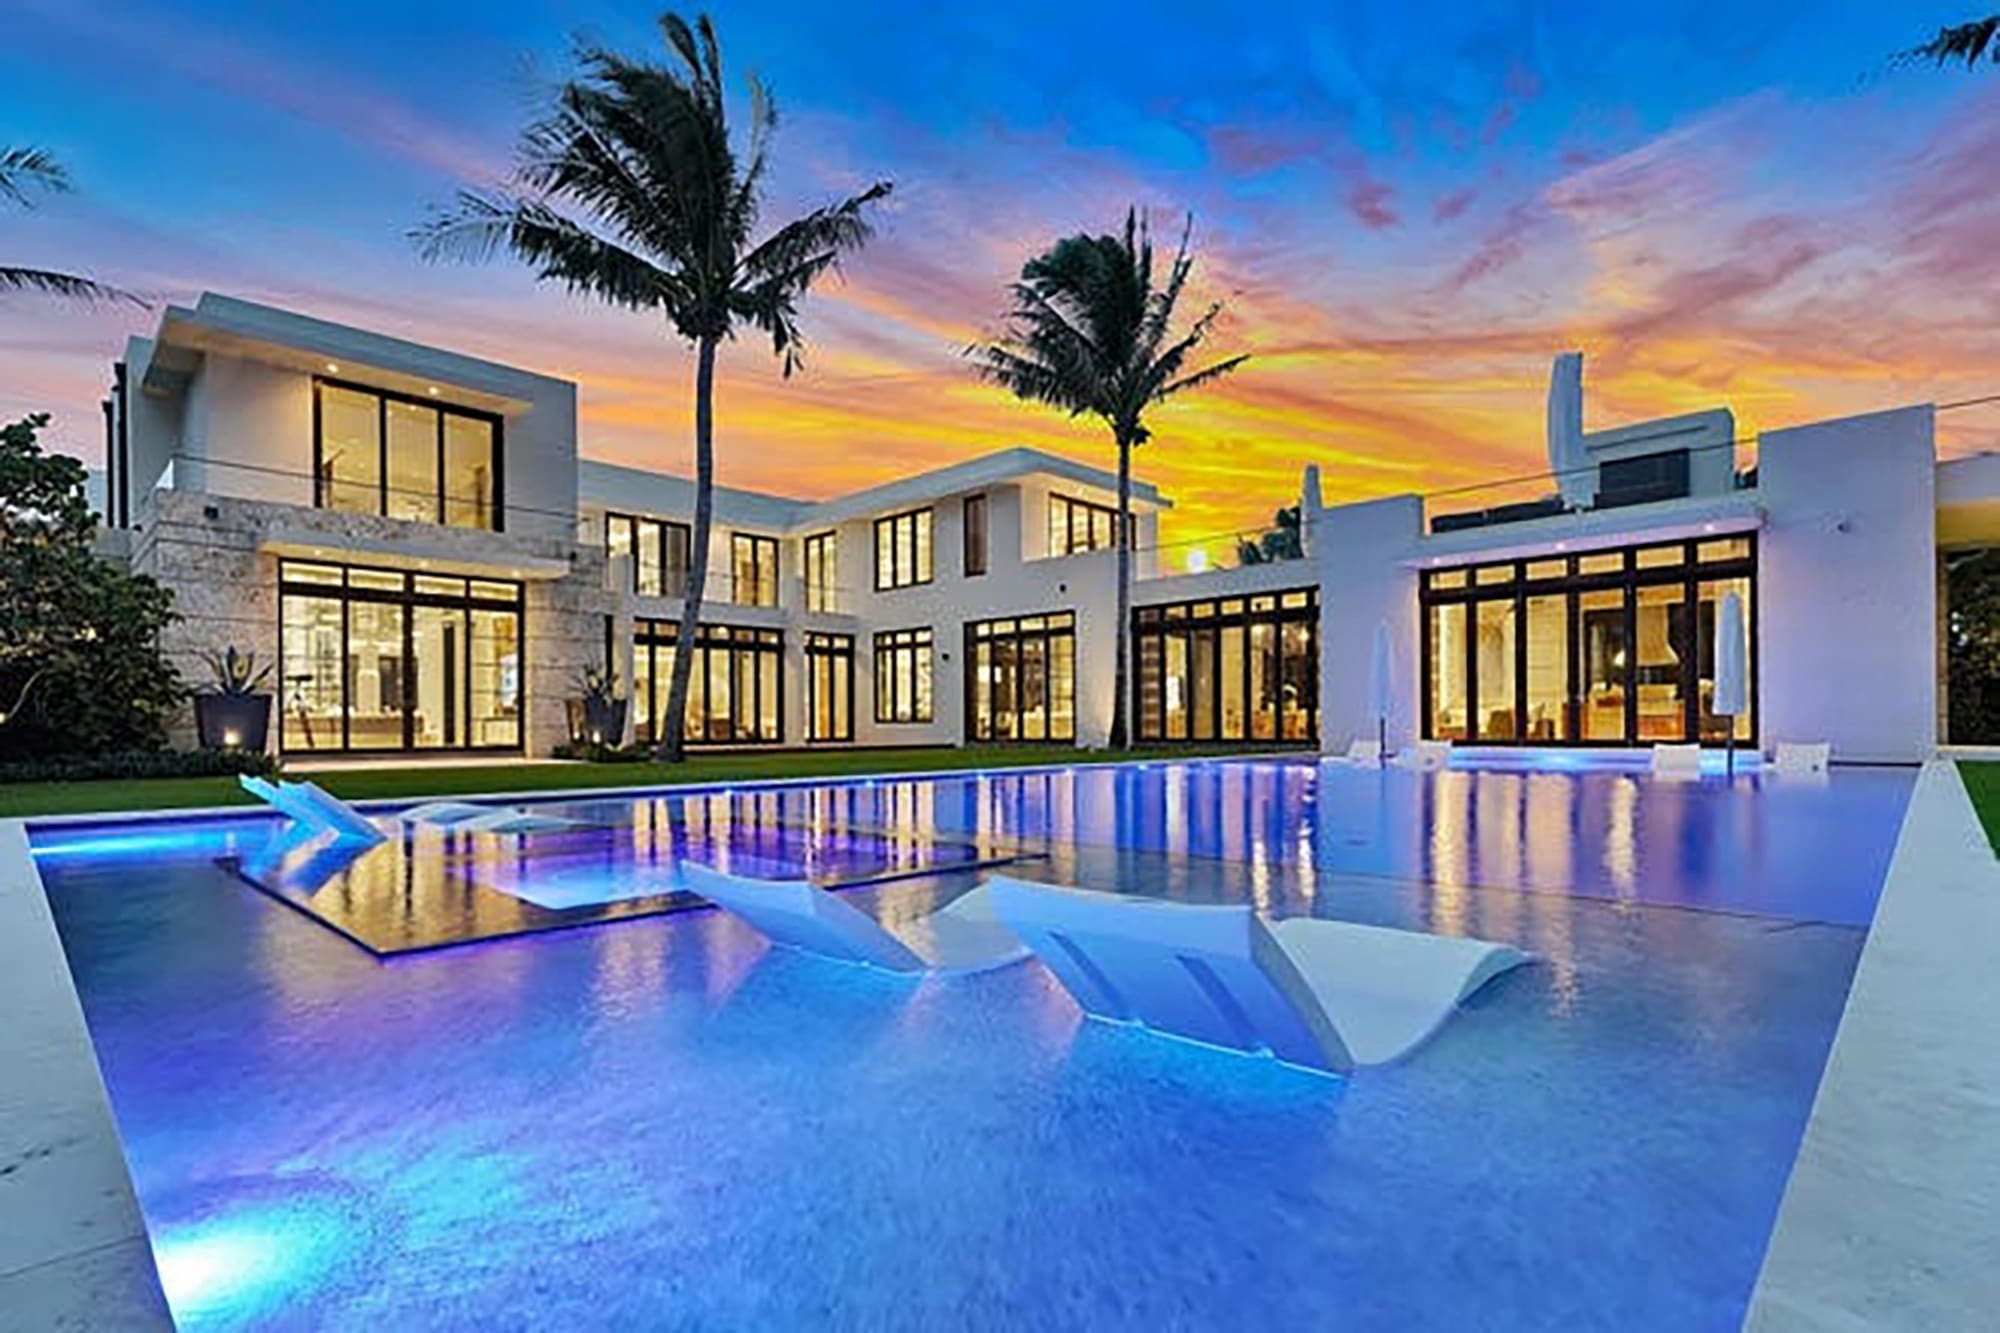 A mystery Russian buyer just bought the most expensive home in Florida